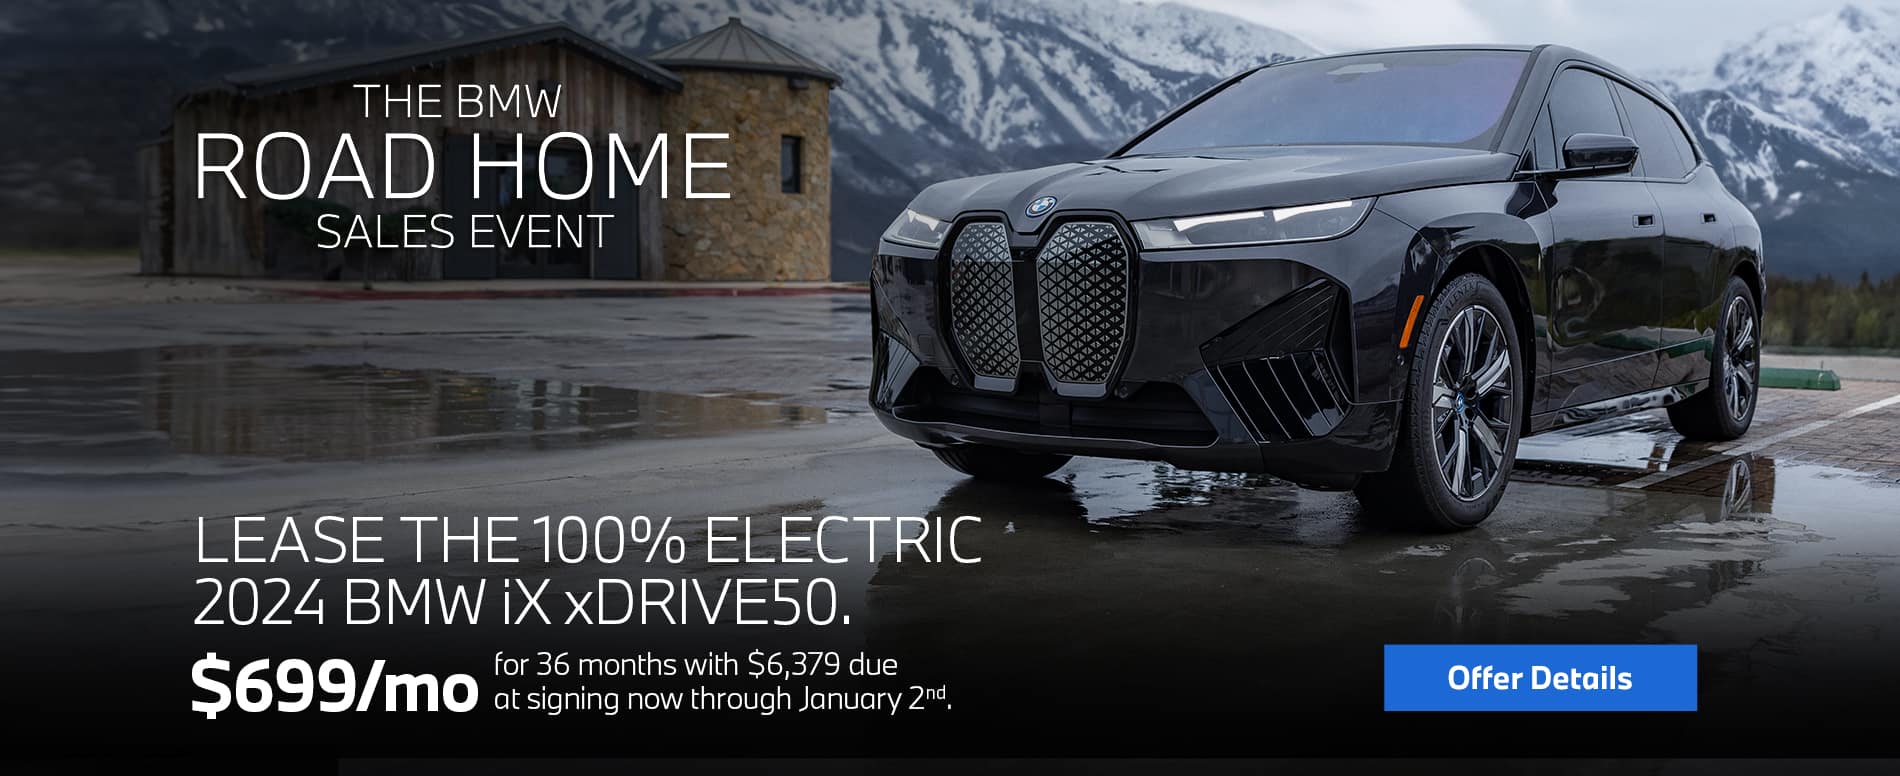 2024 iX xDrive50 lease starting at $699 per month for 36 months